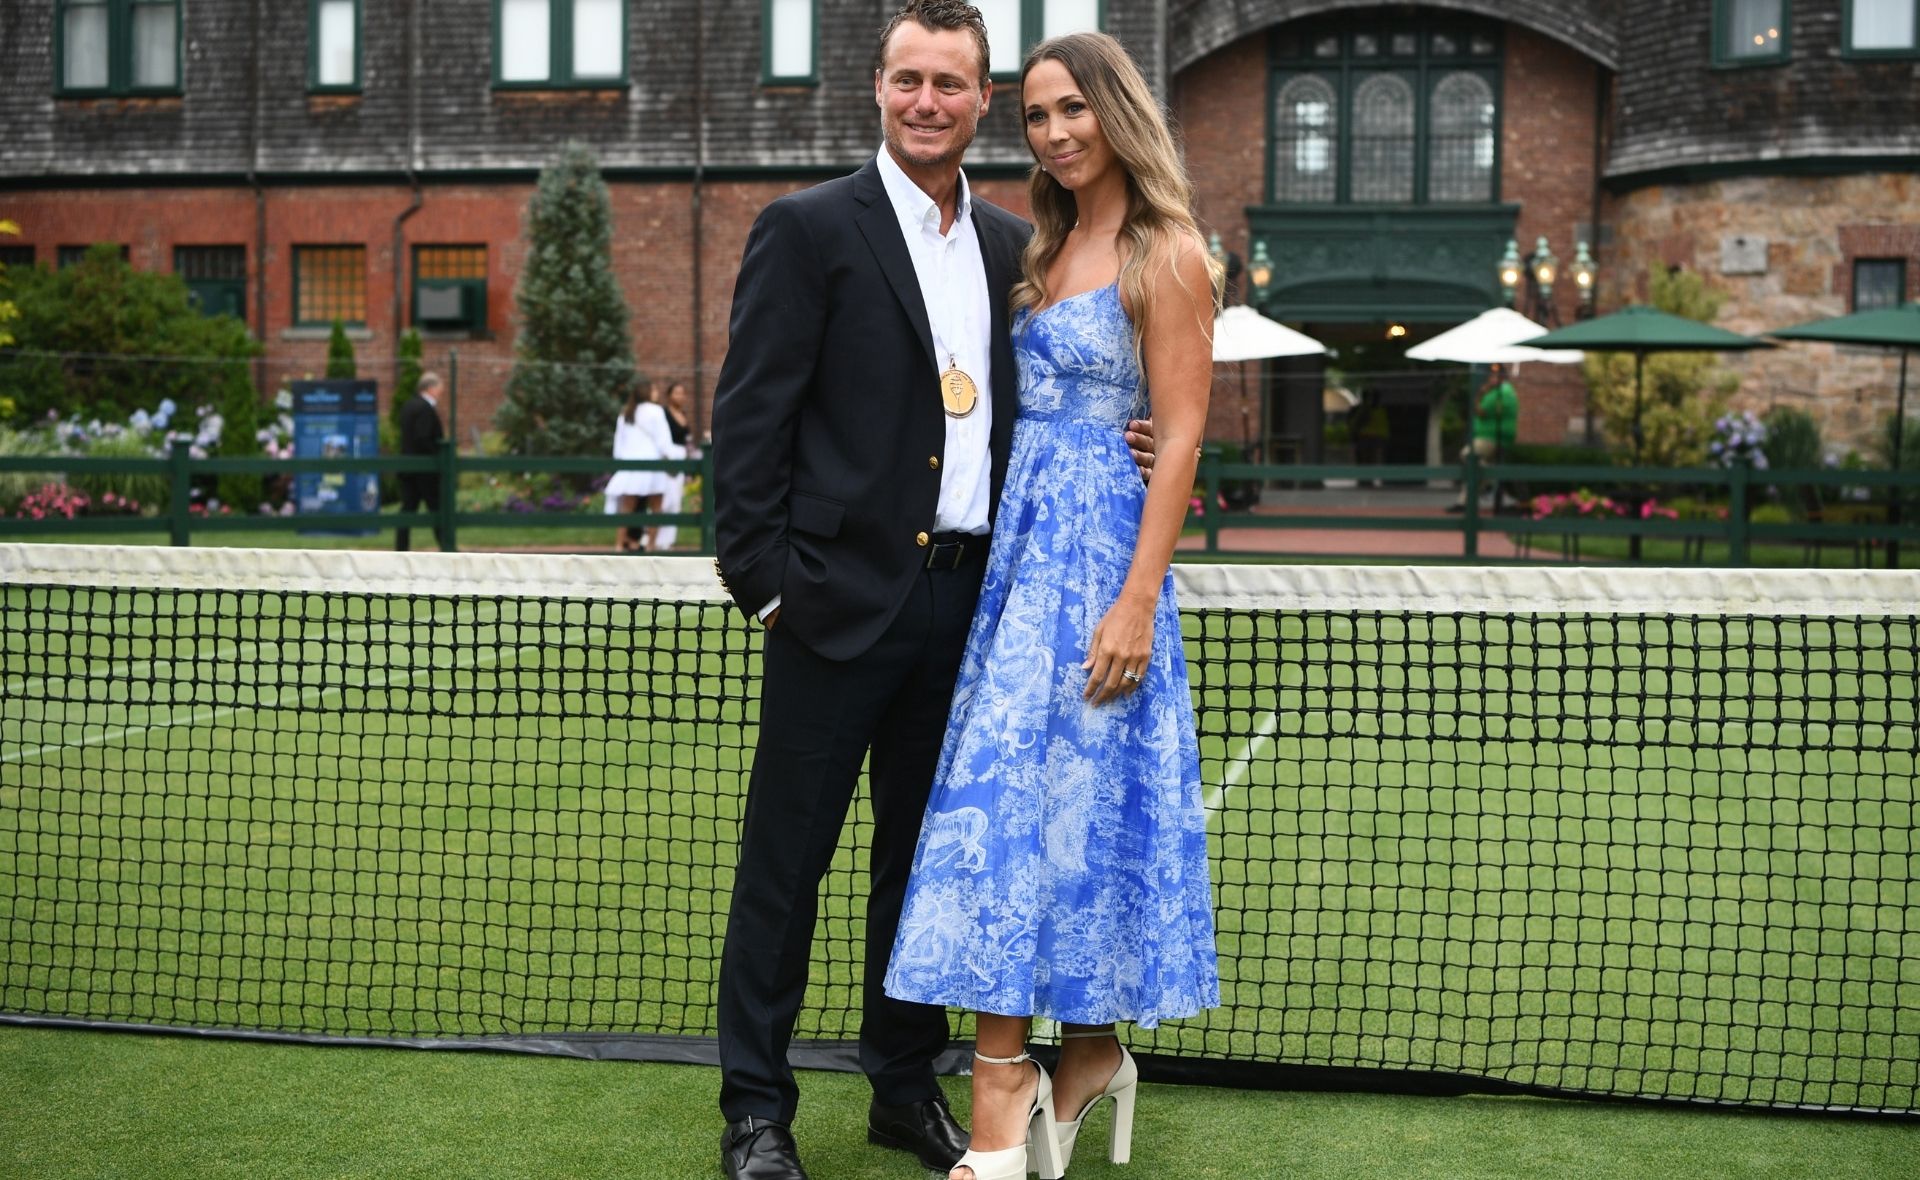 Lleyton Hewitt has bought Bec a $10 million house